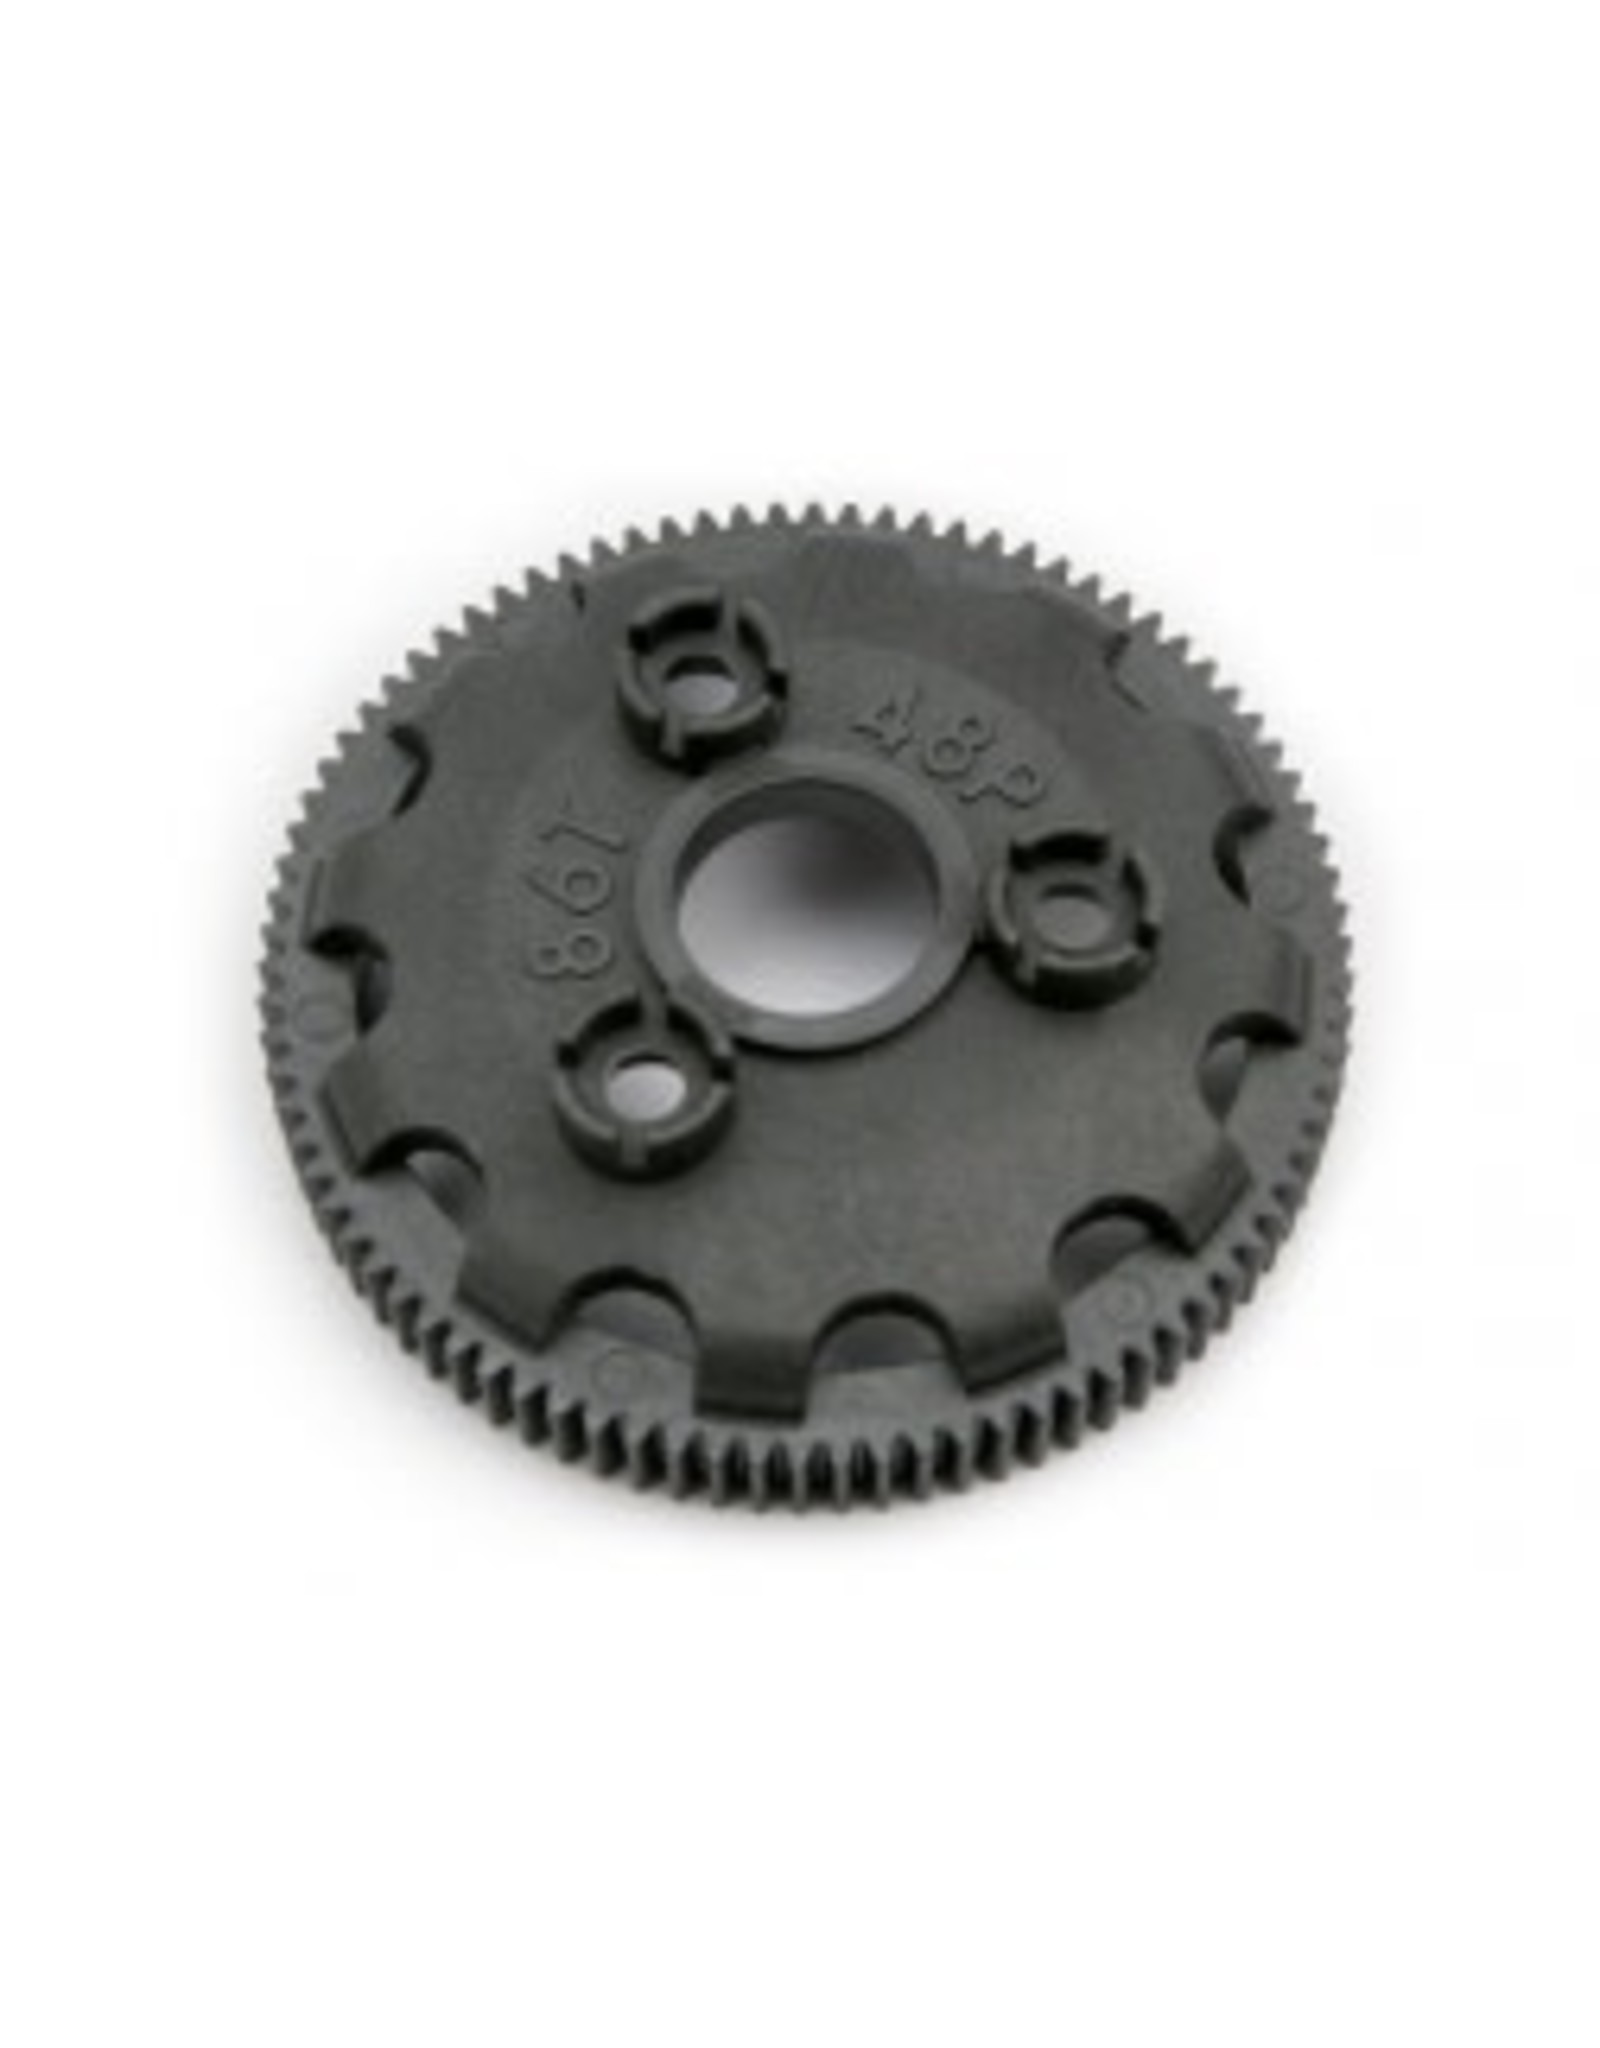 TRA 4686 Spur Gear 48P 86T